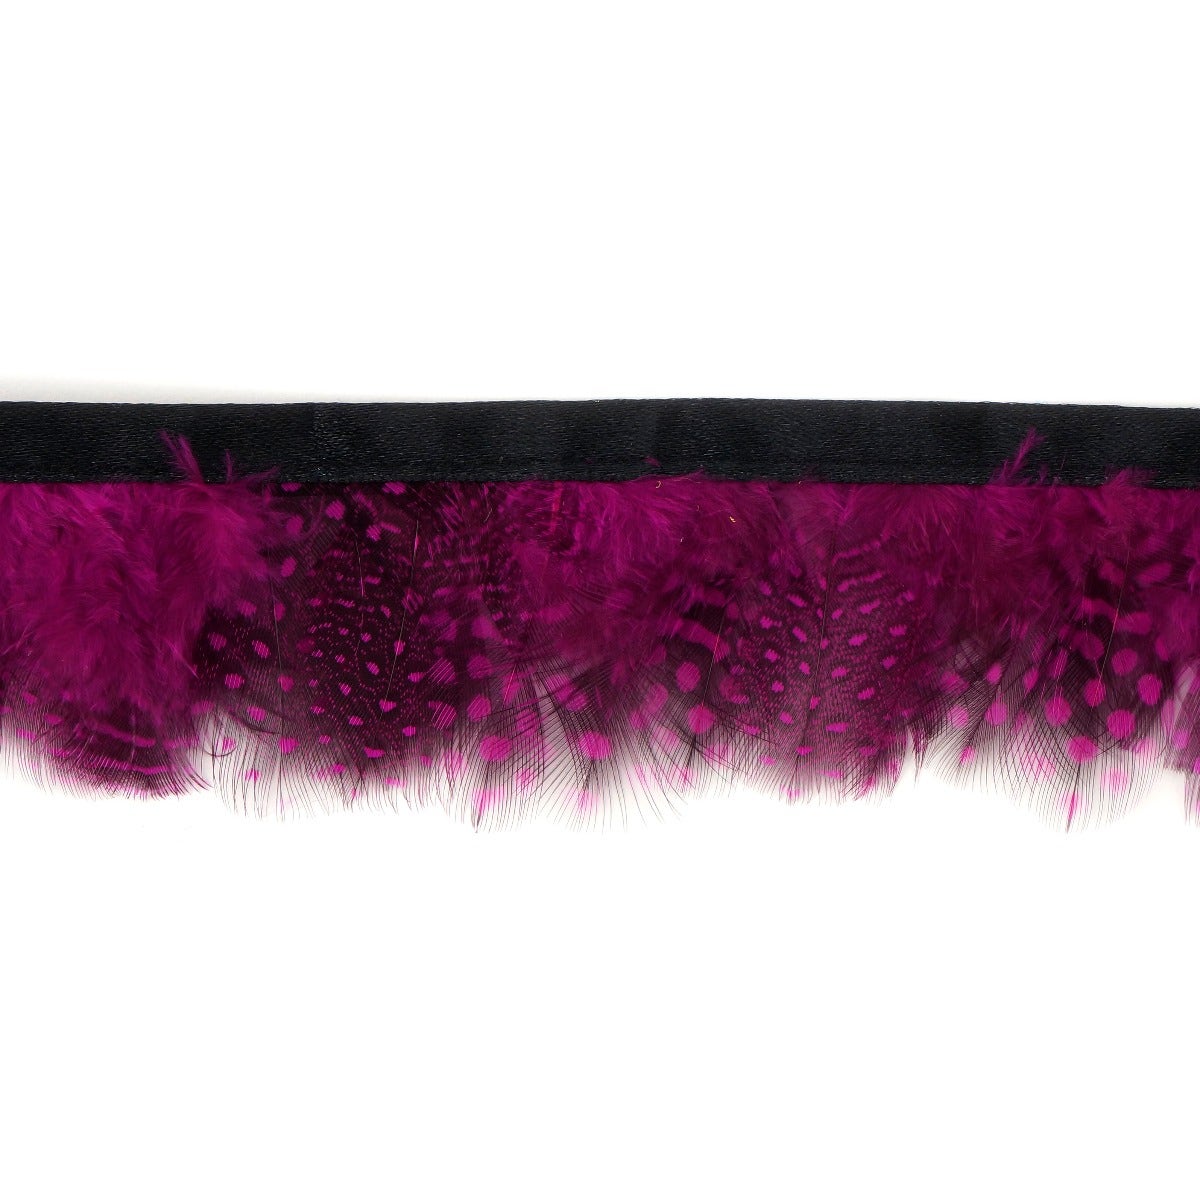 Guinea Plumage Feather Fringe - 1.75 - 1 Yard - Very Berry